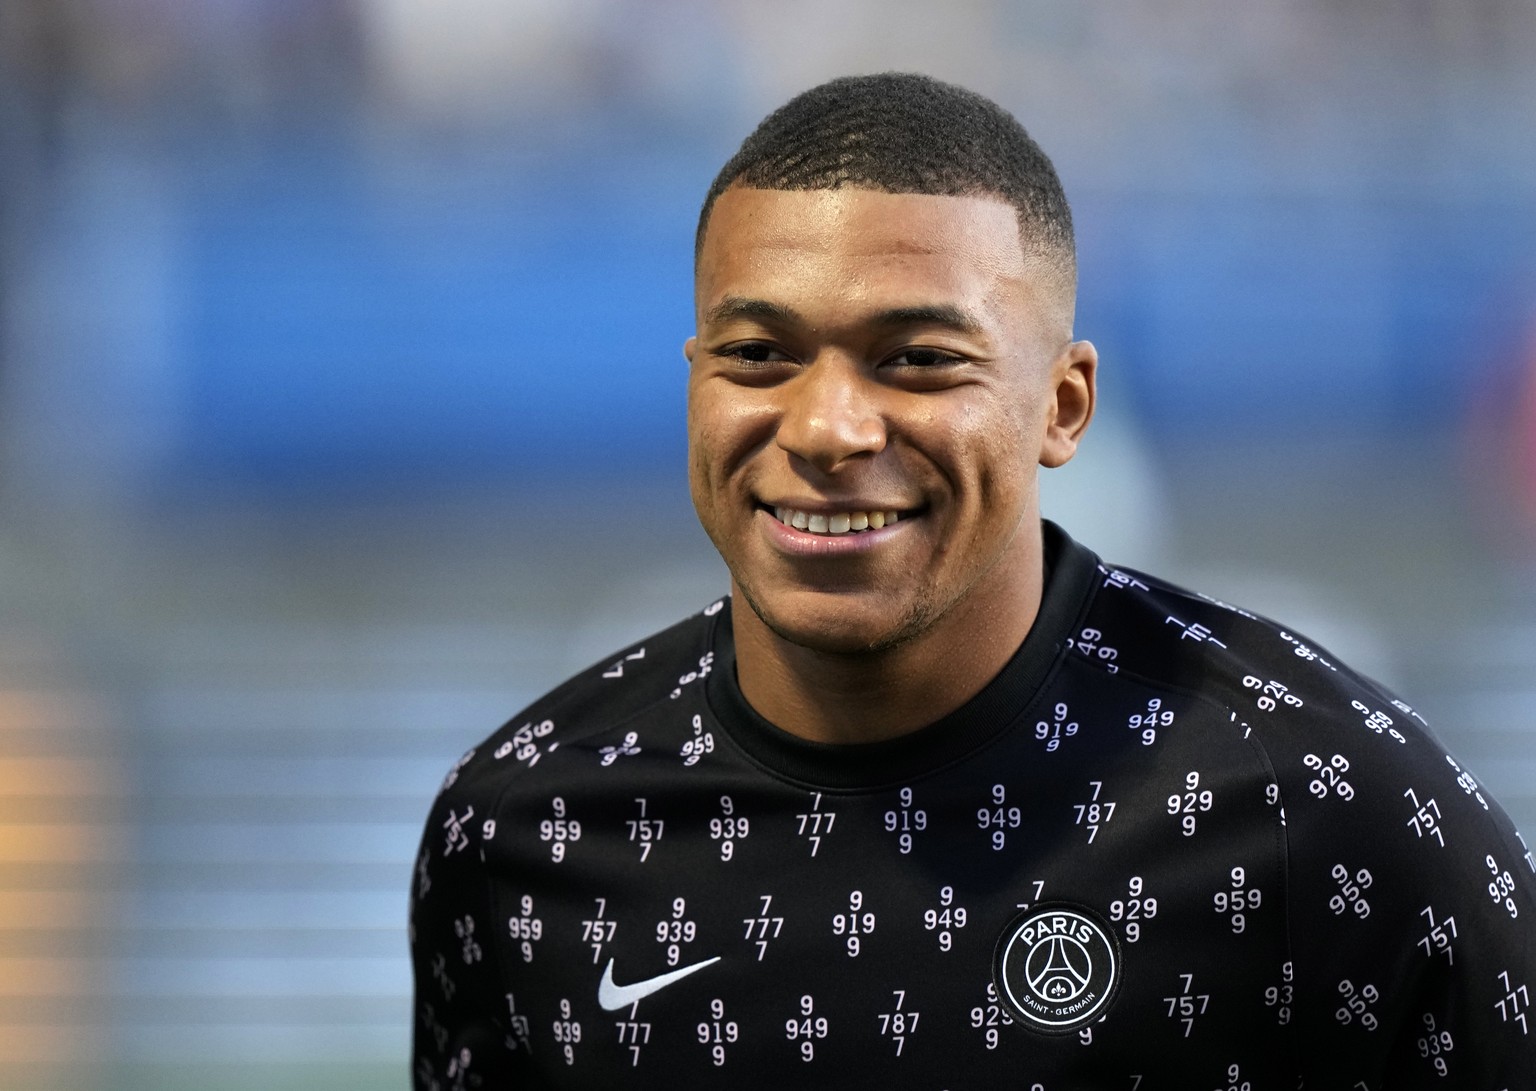 PSG&#039;s Kylian Mbappe smiles during the warm up before the French League One soccer match between Troyes and Paris Saint Germain, at the Stade de l&#039;Aube, in Troyes, France, Saturday, Aug. 7, 2 ...